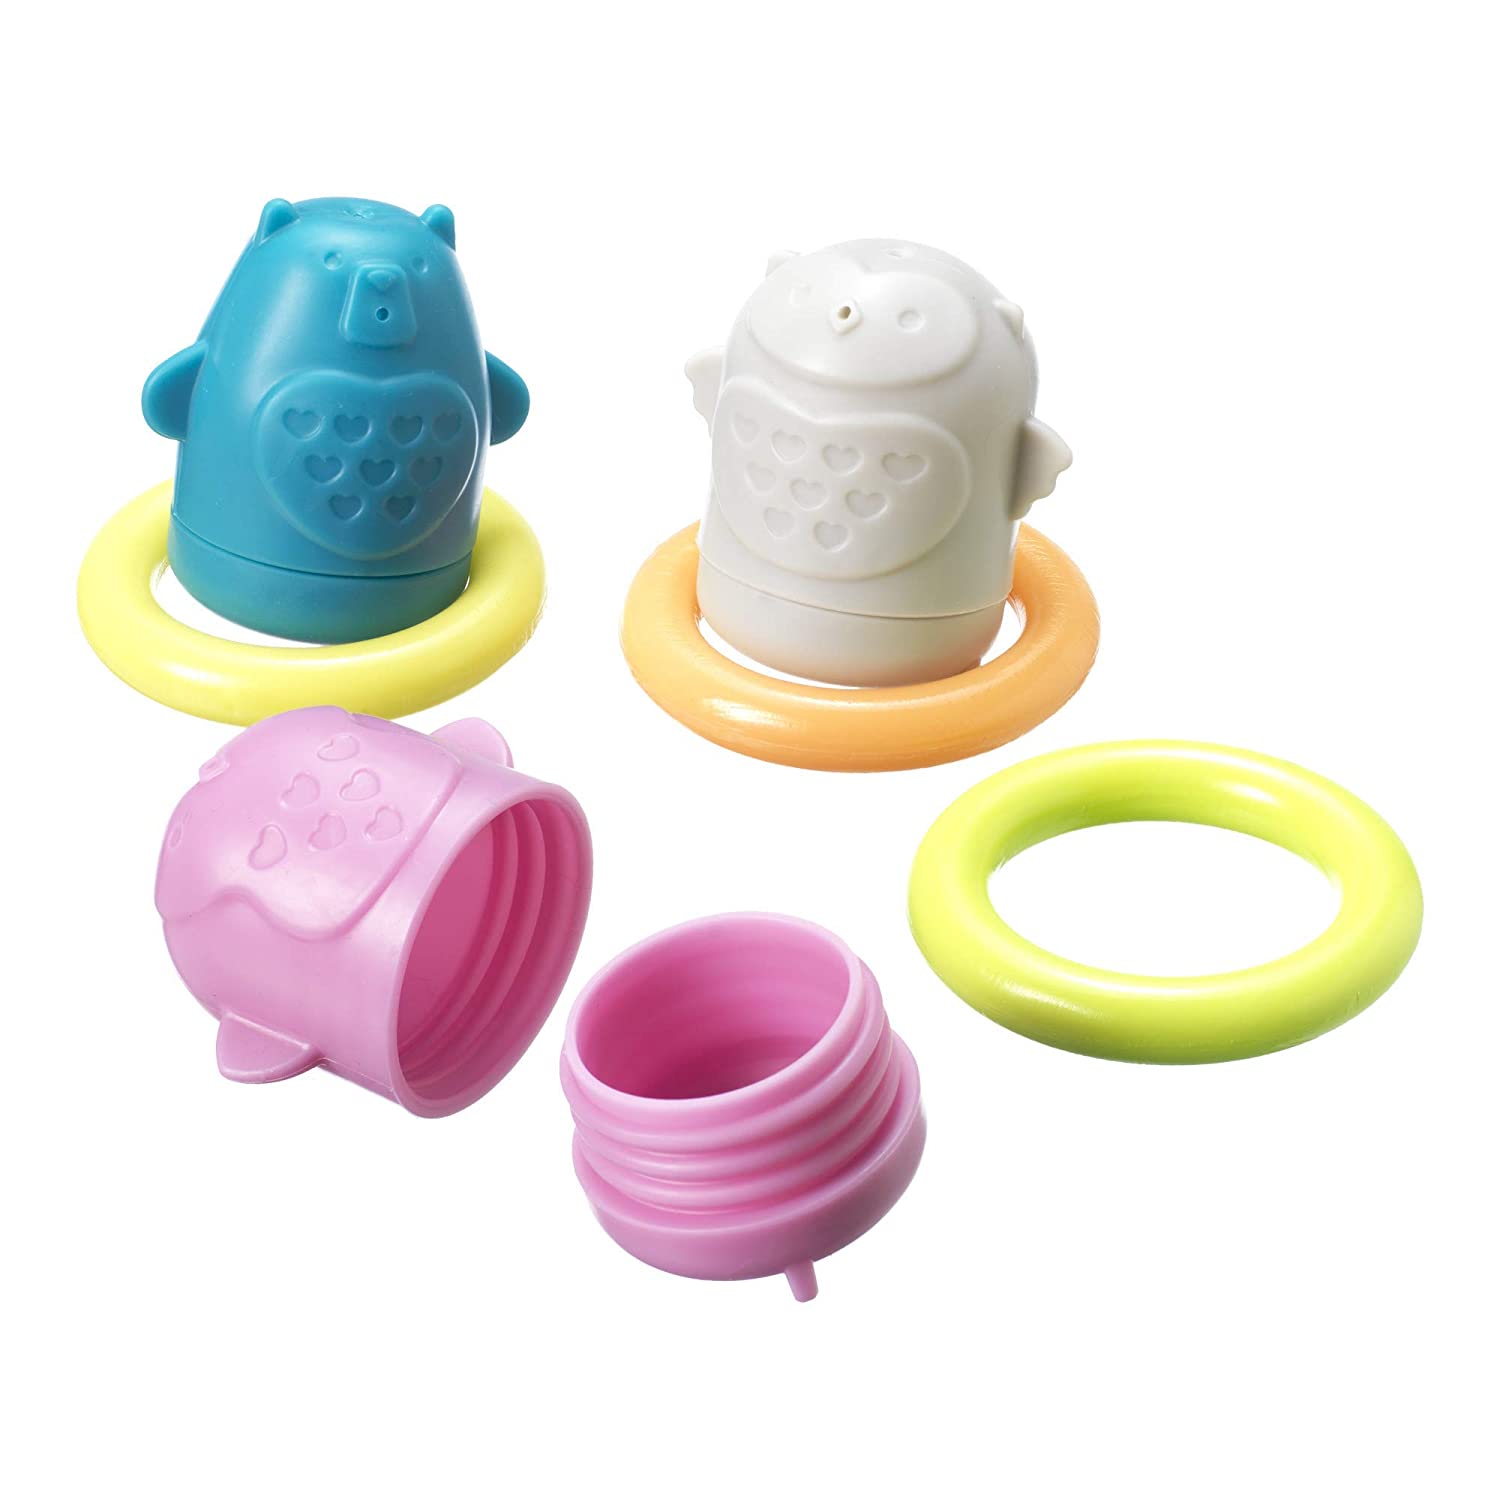 Tommee Tippee 491009 Splashtime Assortment - Squirtee Squirting Toy, Multi-Colour, 112 g